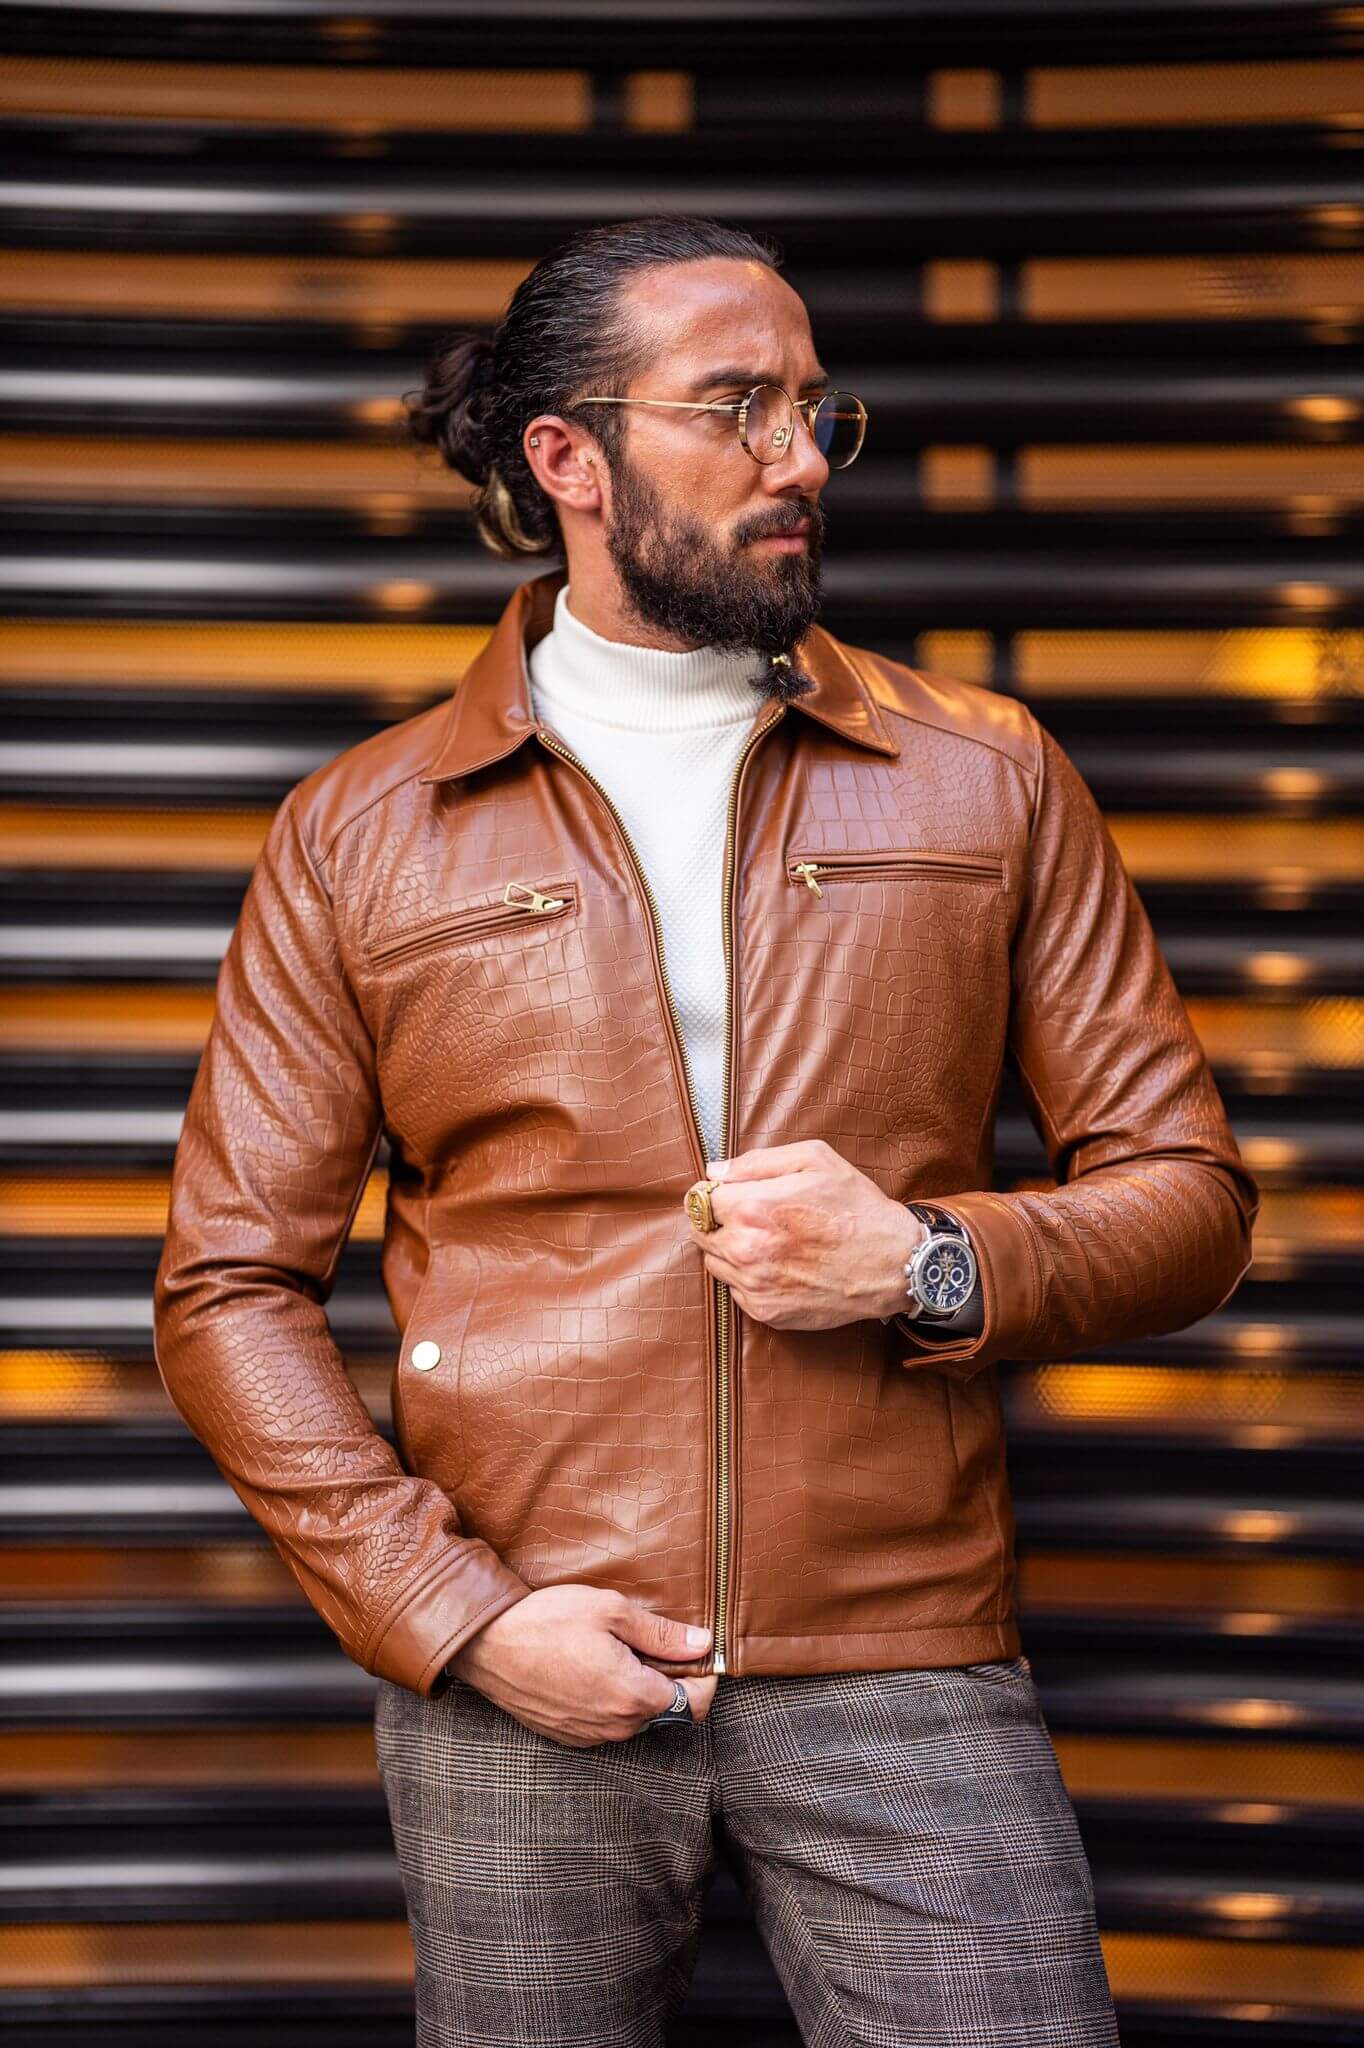 A Tan Leather Coat on display.